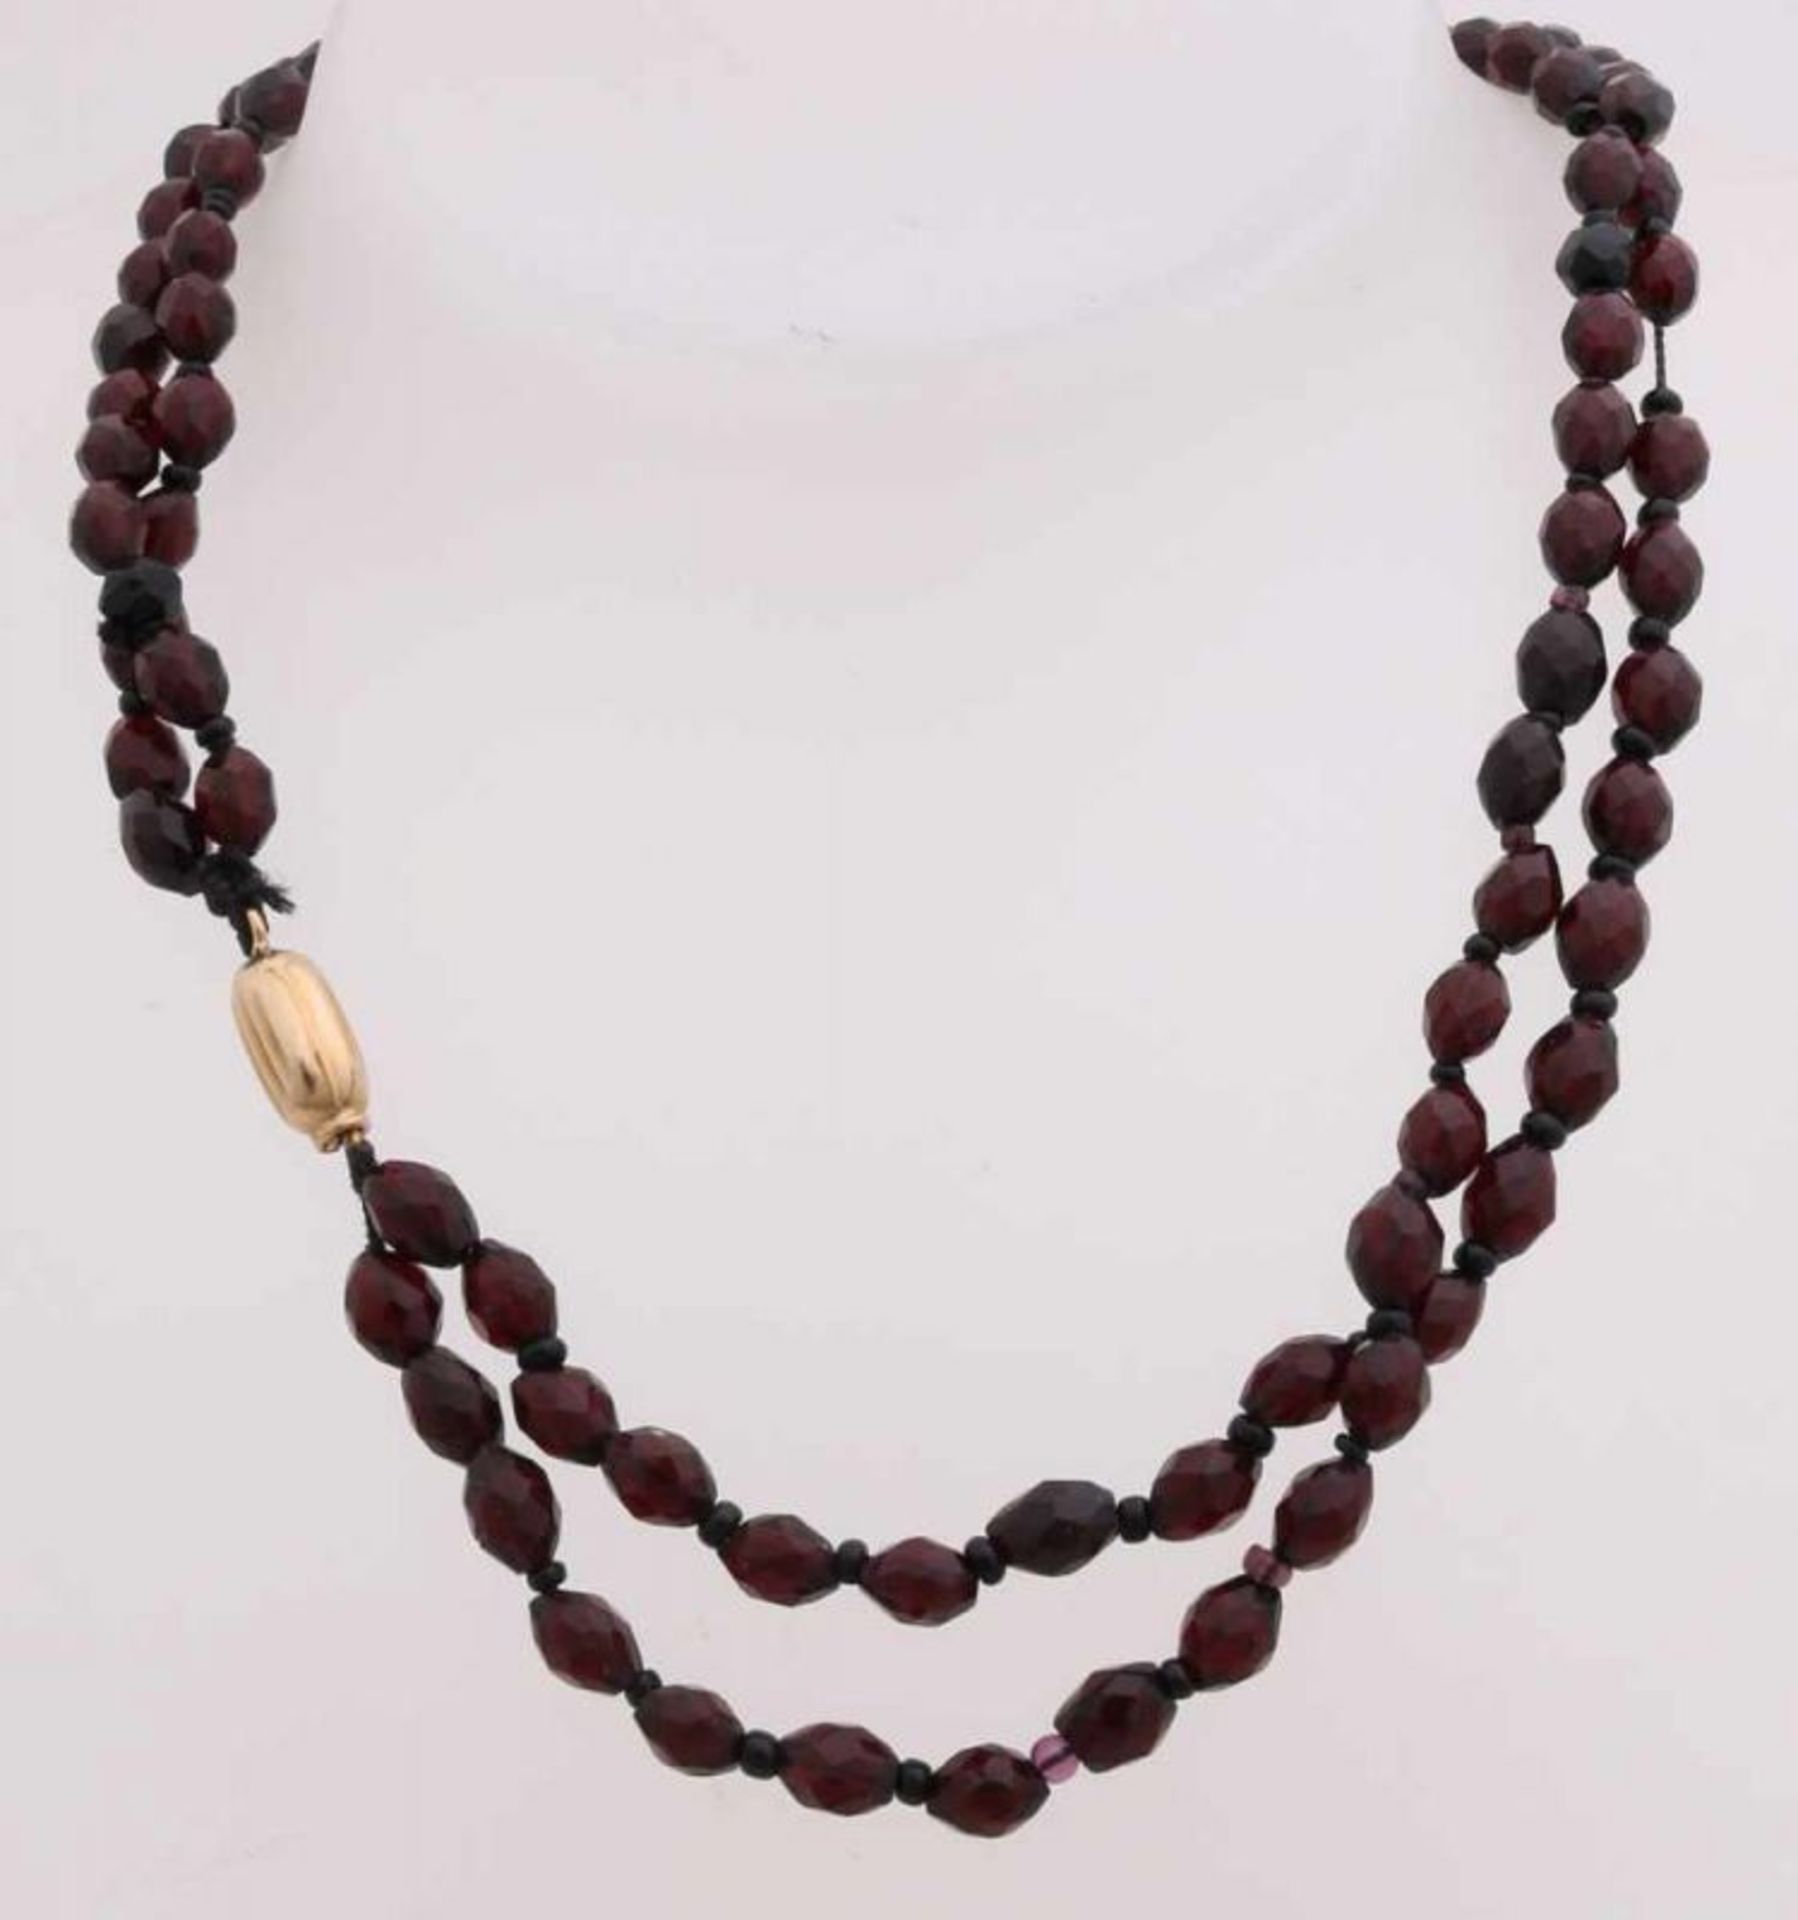 Garnet collar with gold closure, 585/000. A necklace of 2 rows of oval-faced garnets, 8 mm,